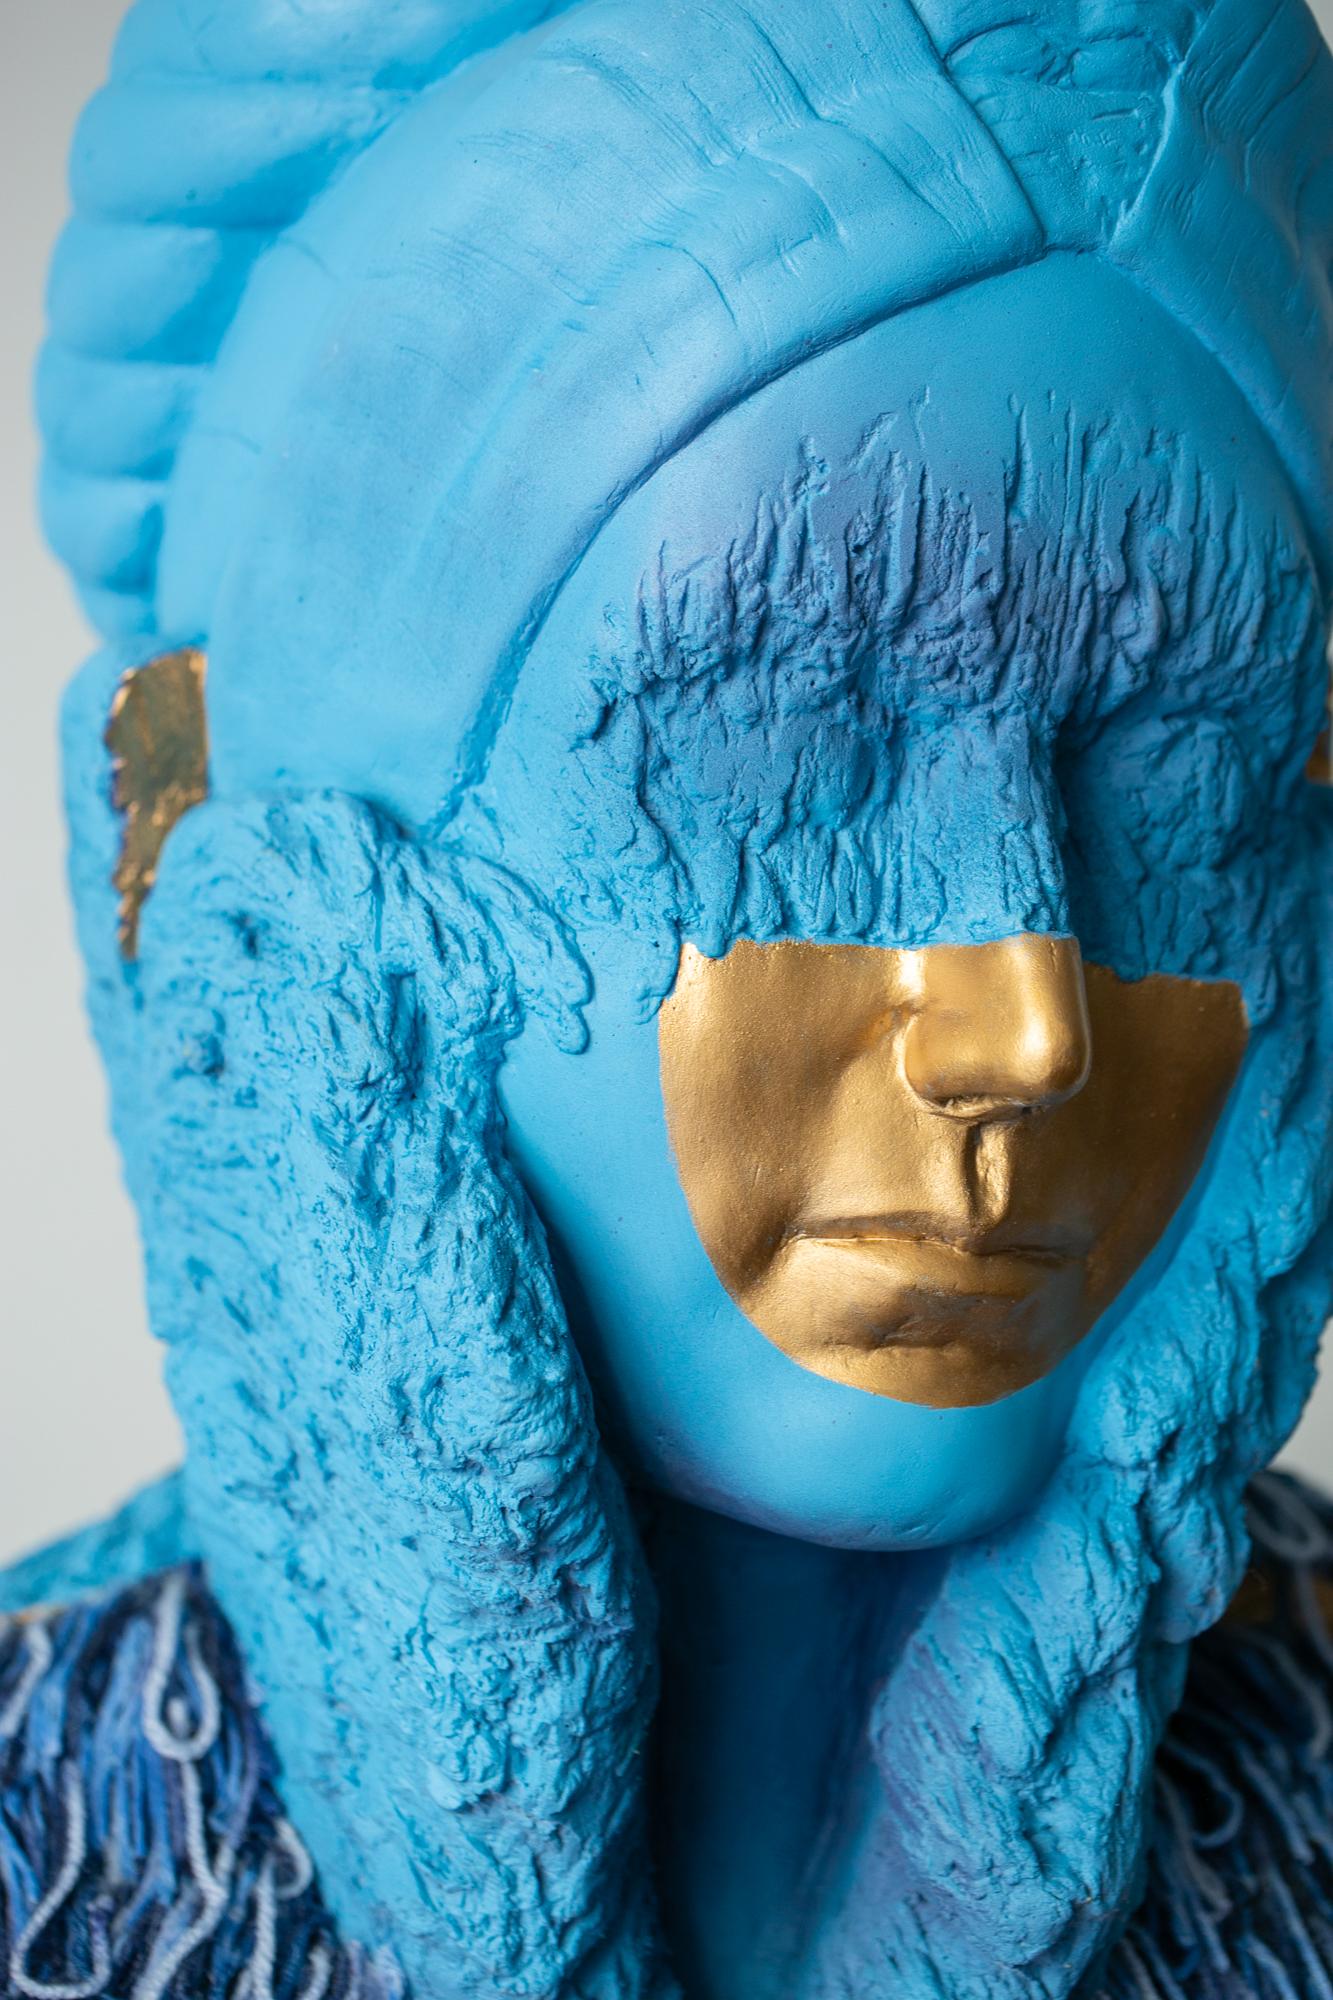 This blue and gold-colored figurative sculpture titled 